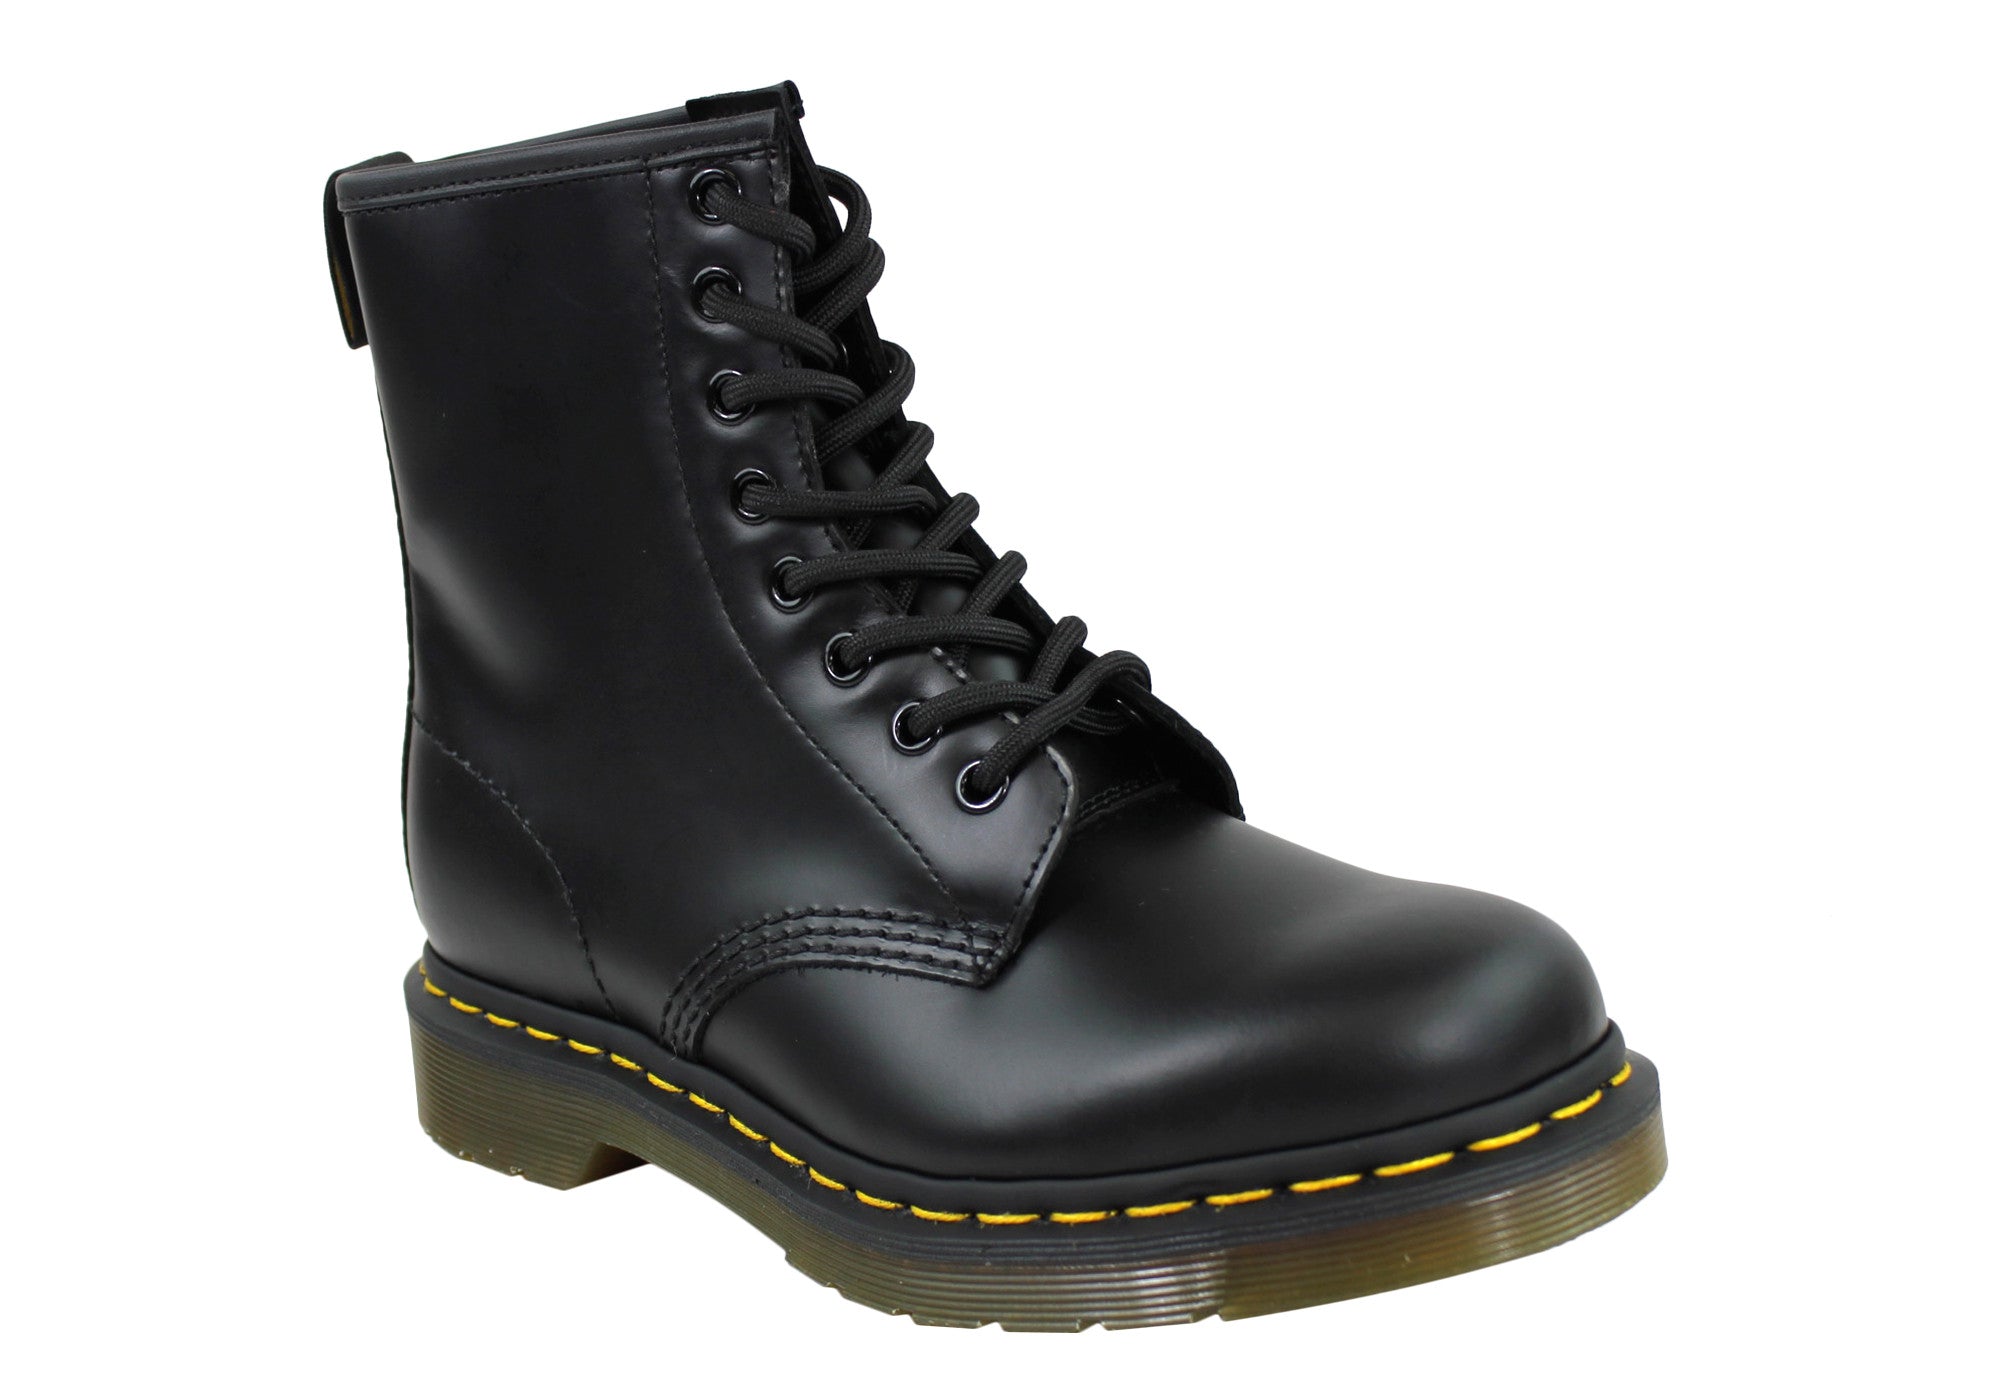 Rey Lear fama trolebús Dr Martens 1460 Black Smooth Unisex Leather Lace Up Fashion Boots – Brand  House Direct